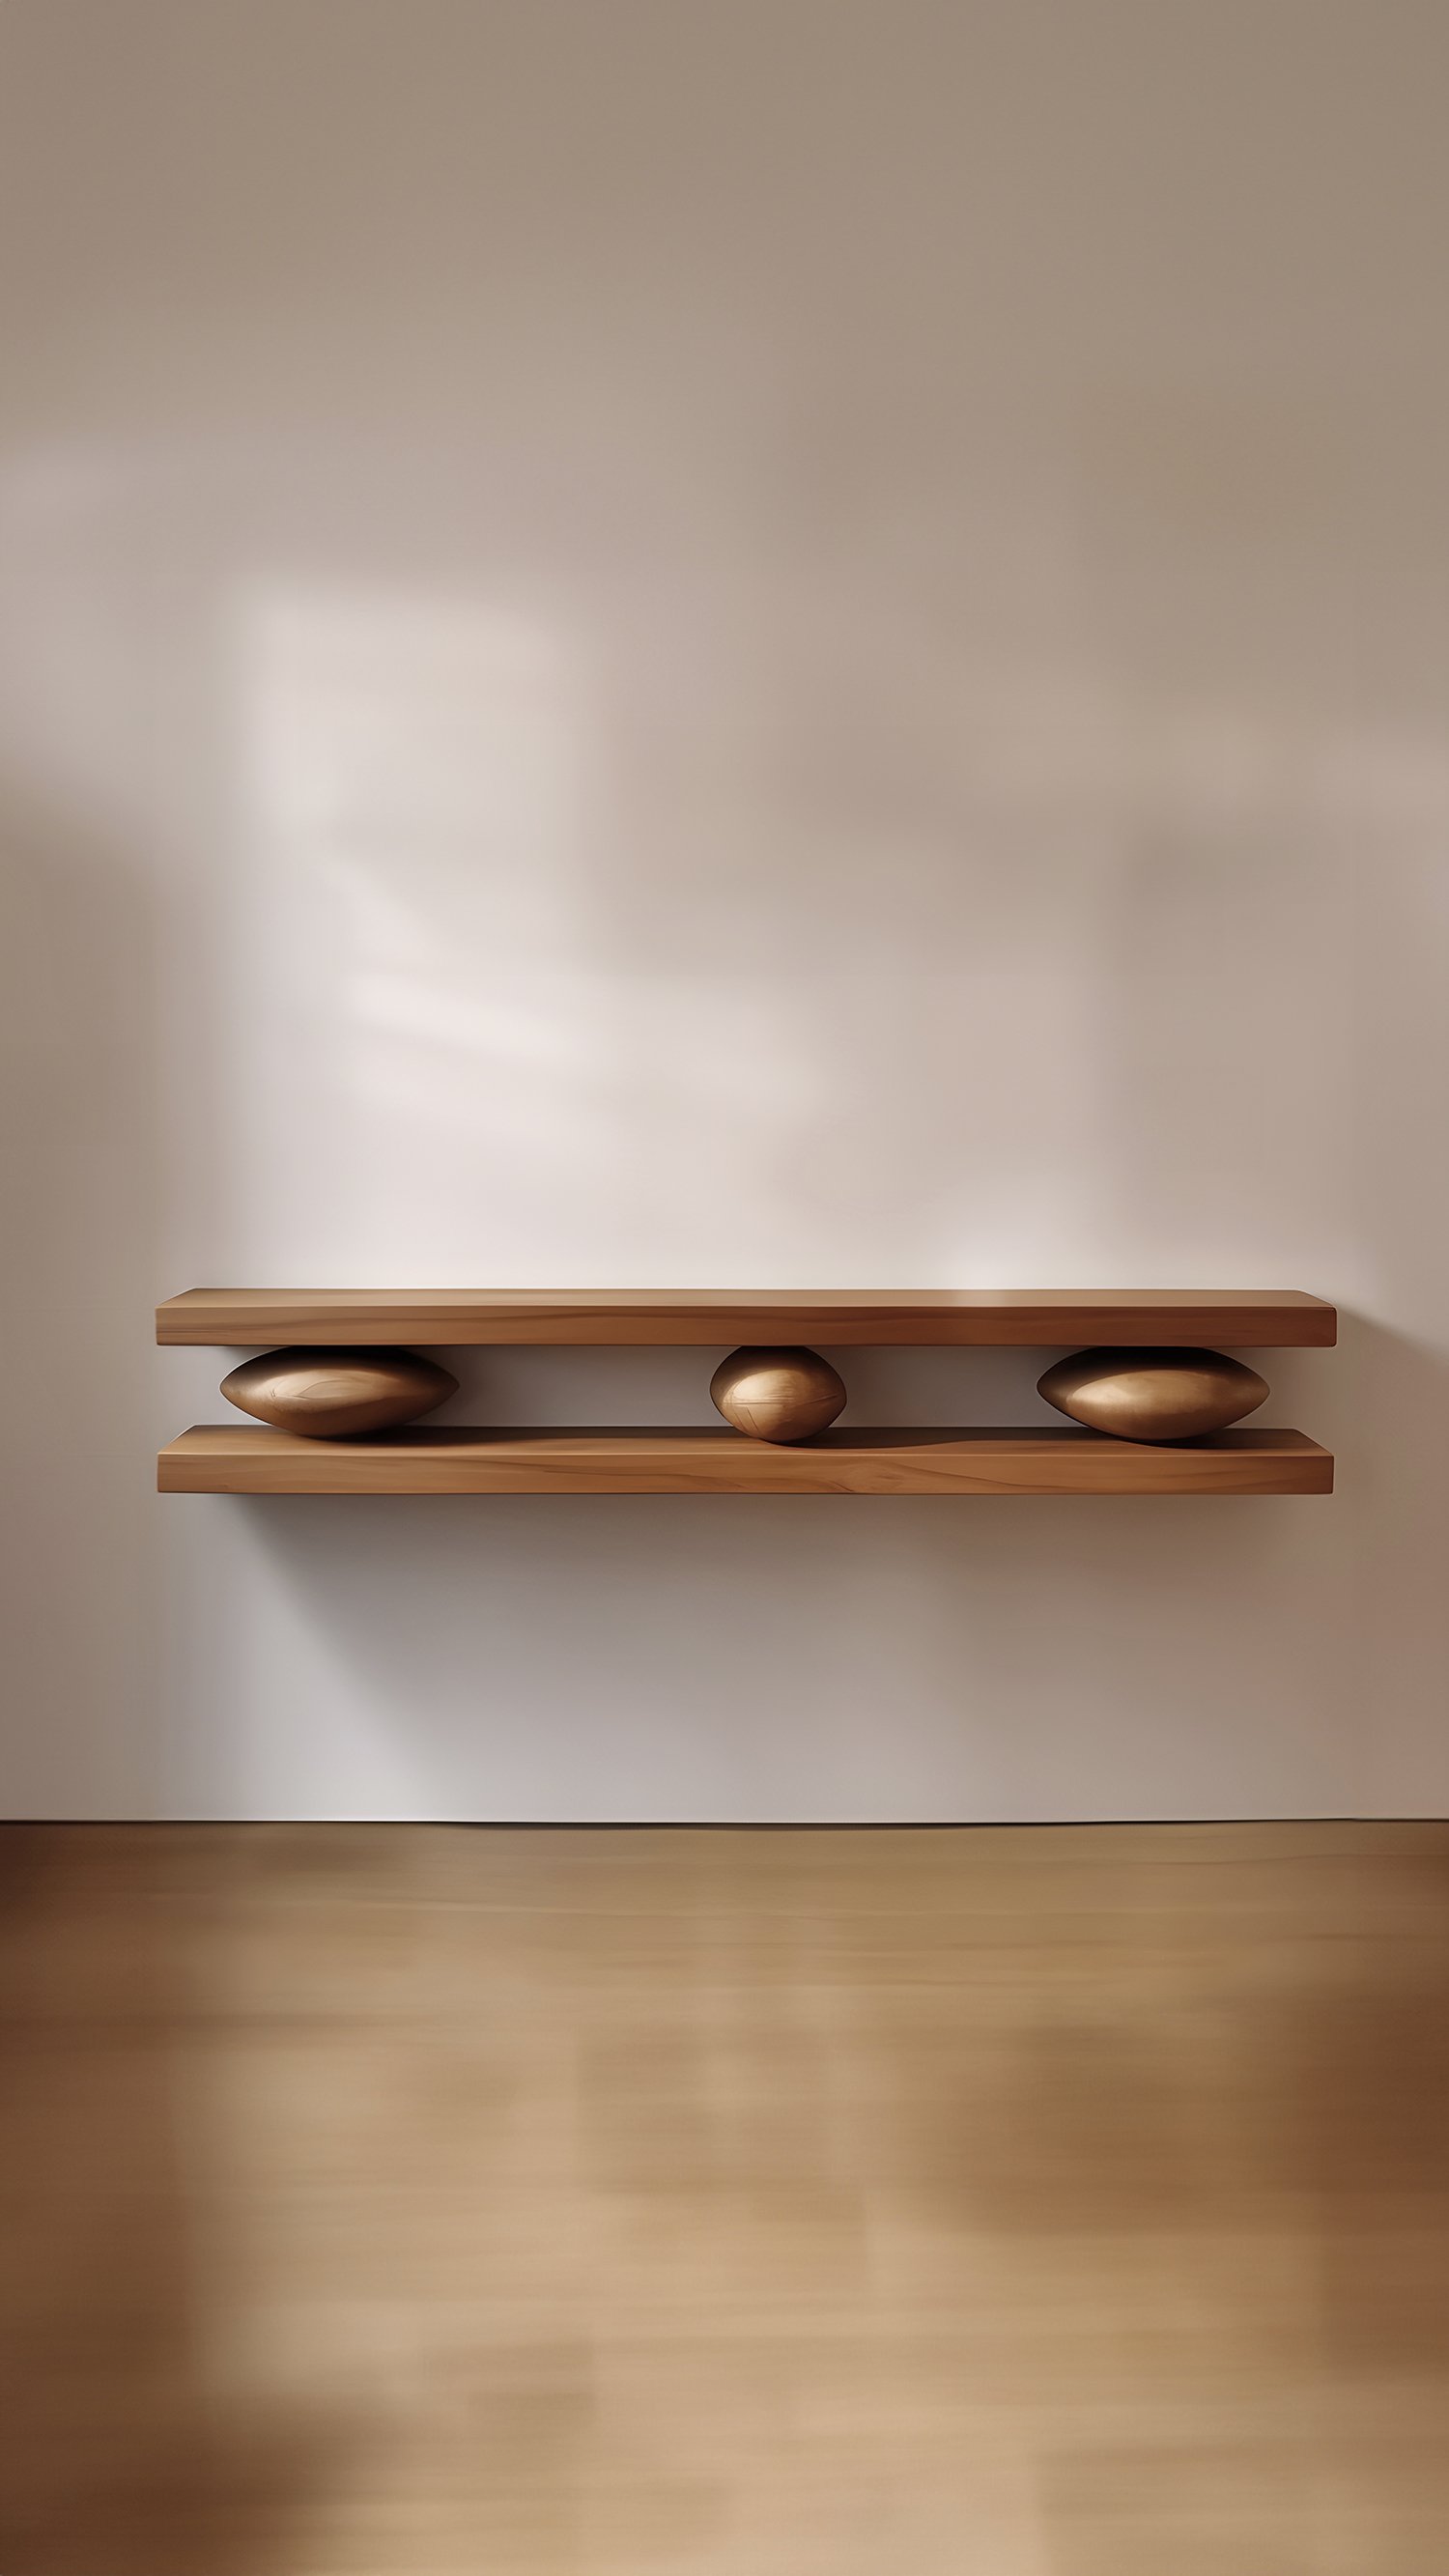 Set of Two Large Floating Shelves with Three Sculptural Wooden Pebble Accents in the Middle, Sereno by Joel Escalona — 2.jpg